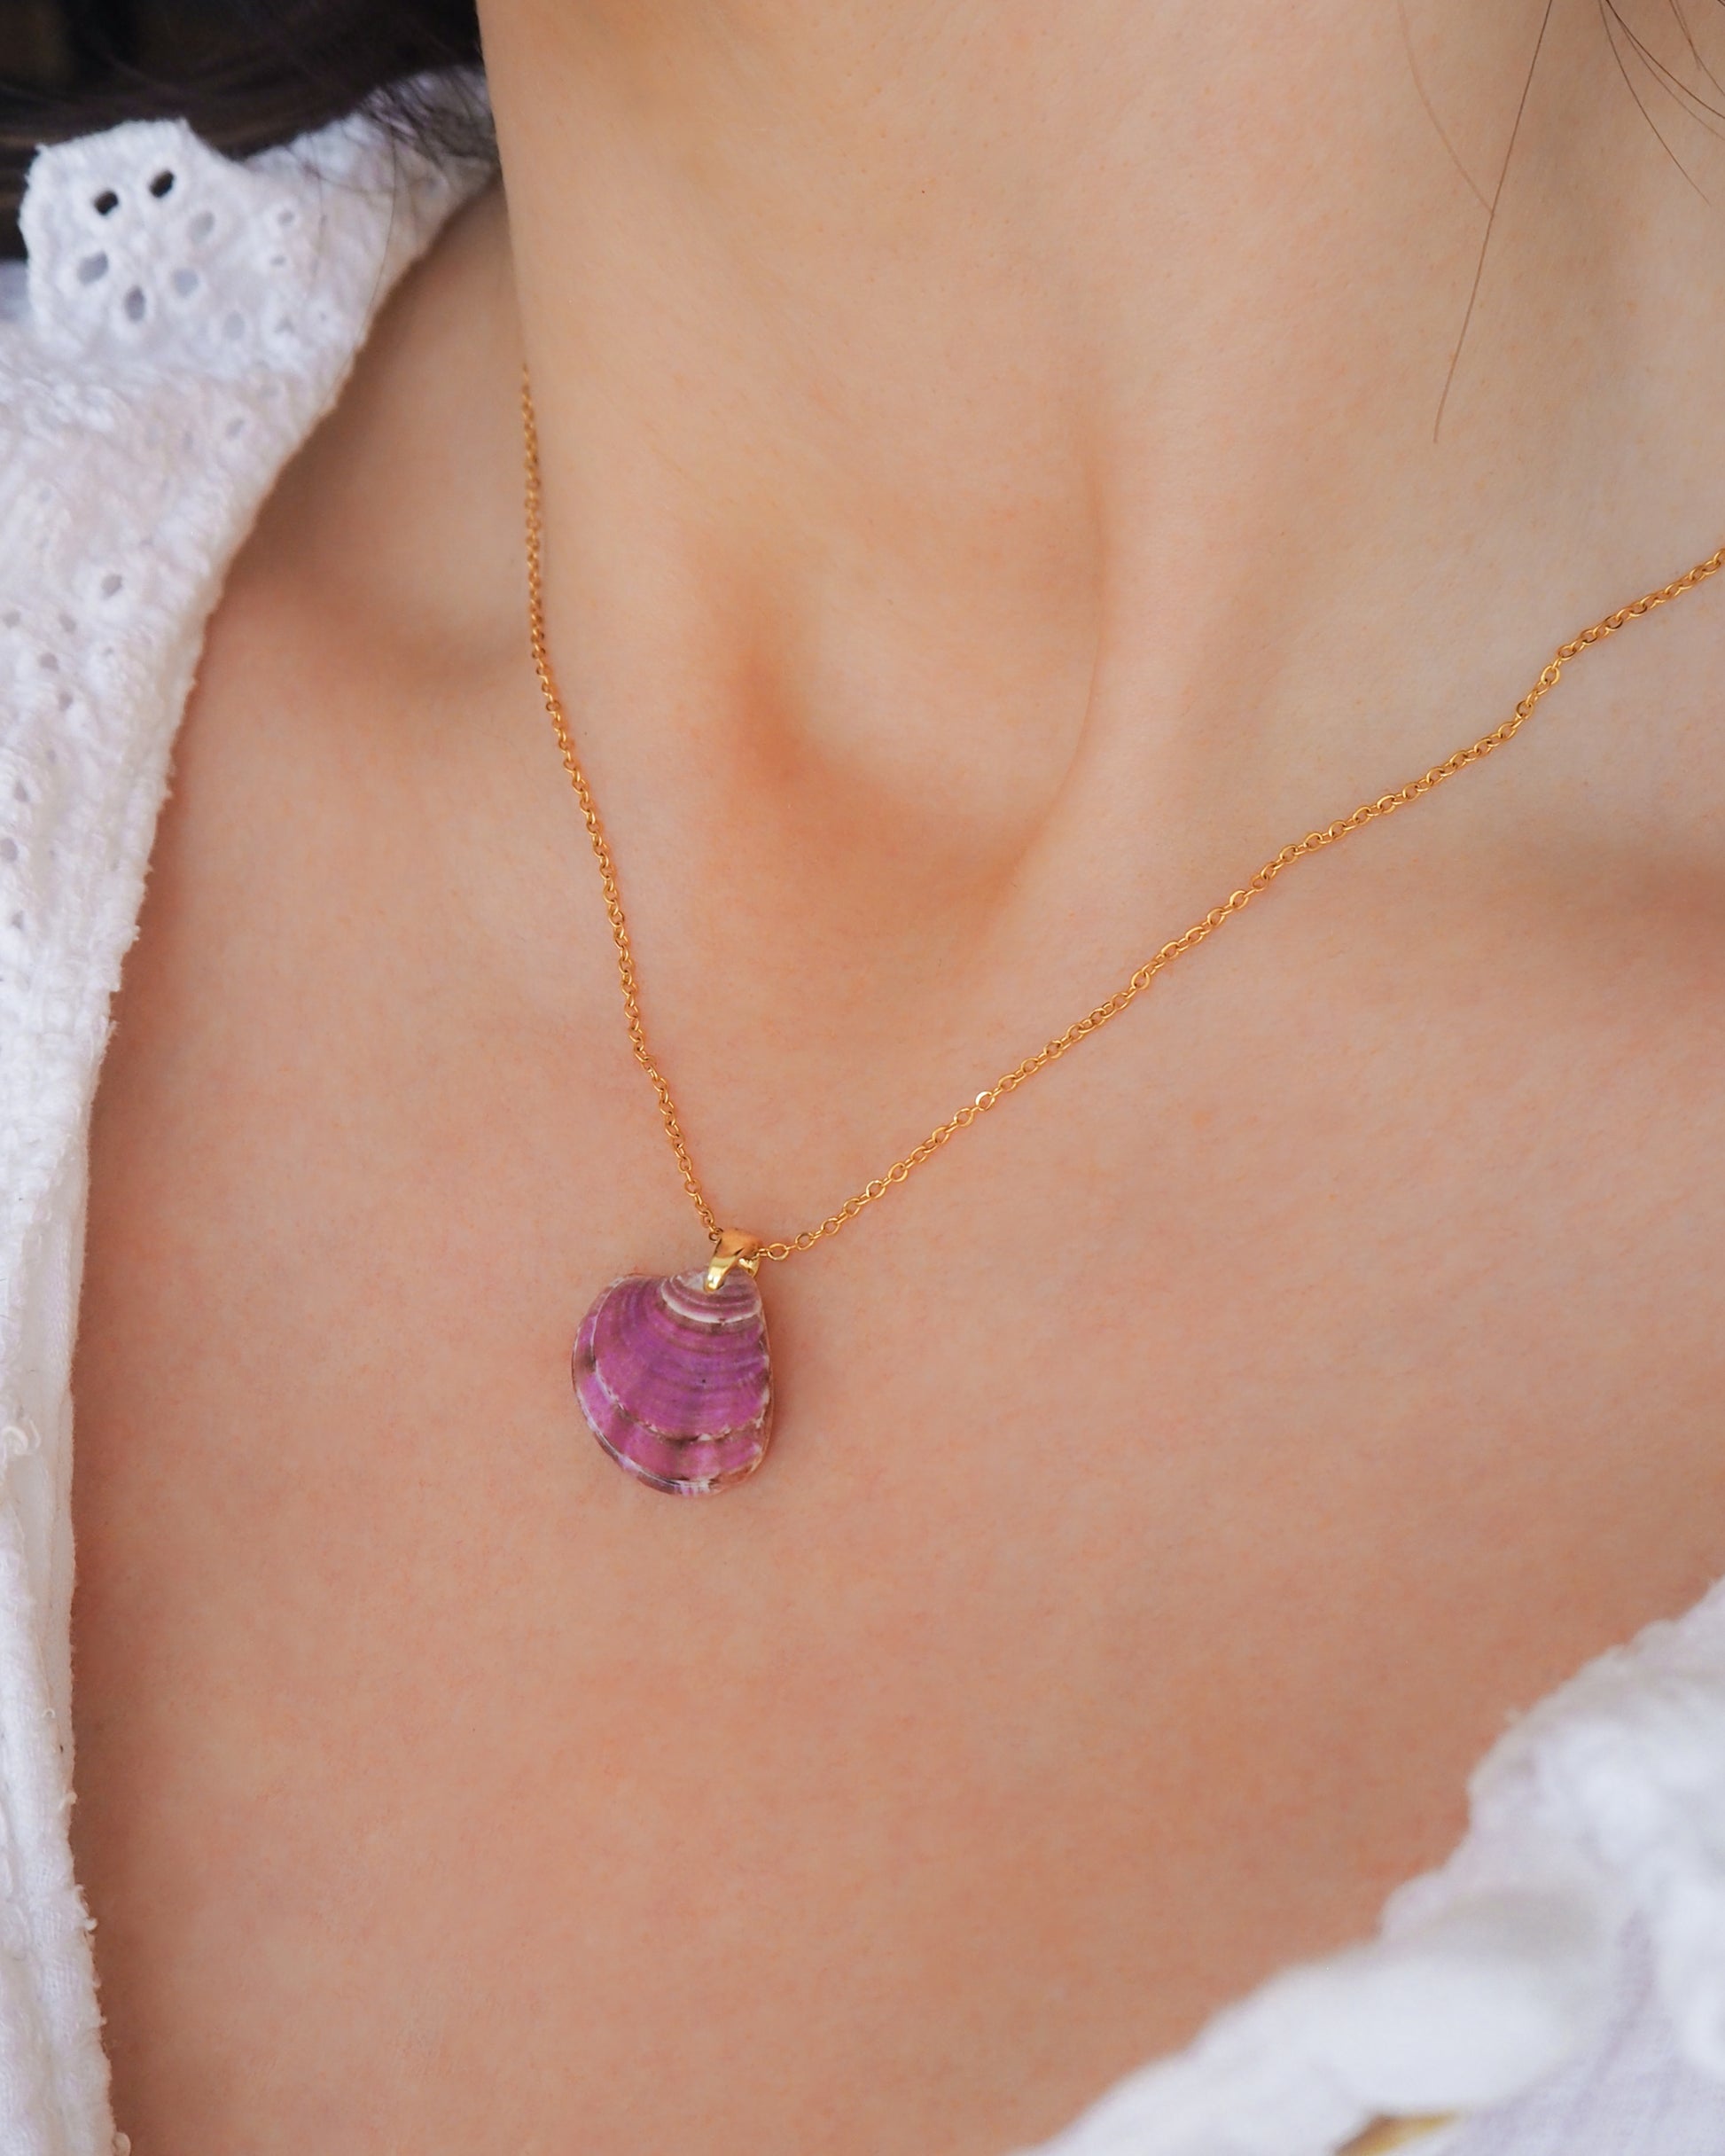 Model wearing Purple Plum Venus Shell Gold Necklace from Portugal, seabylou ocean inspired jewelry, real shell necklace